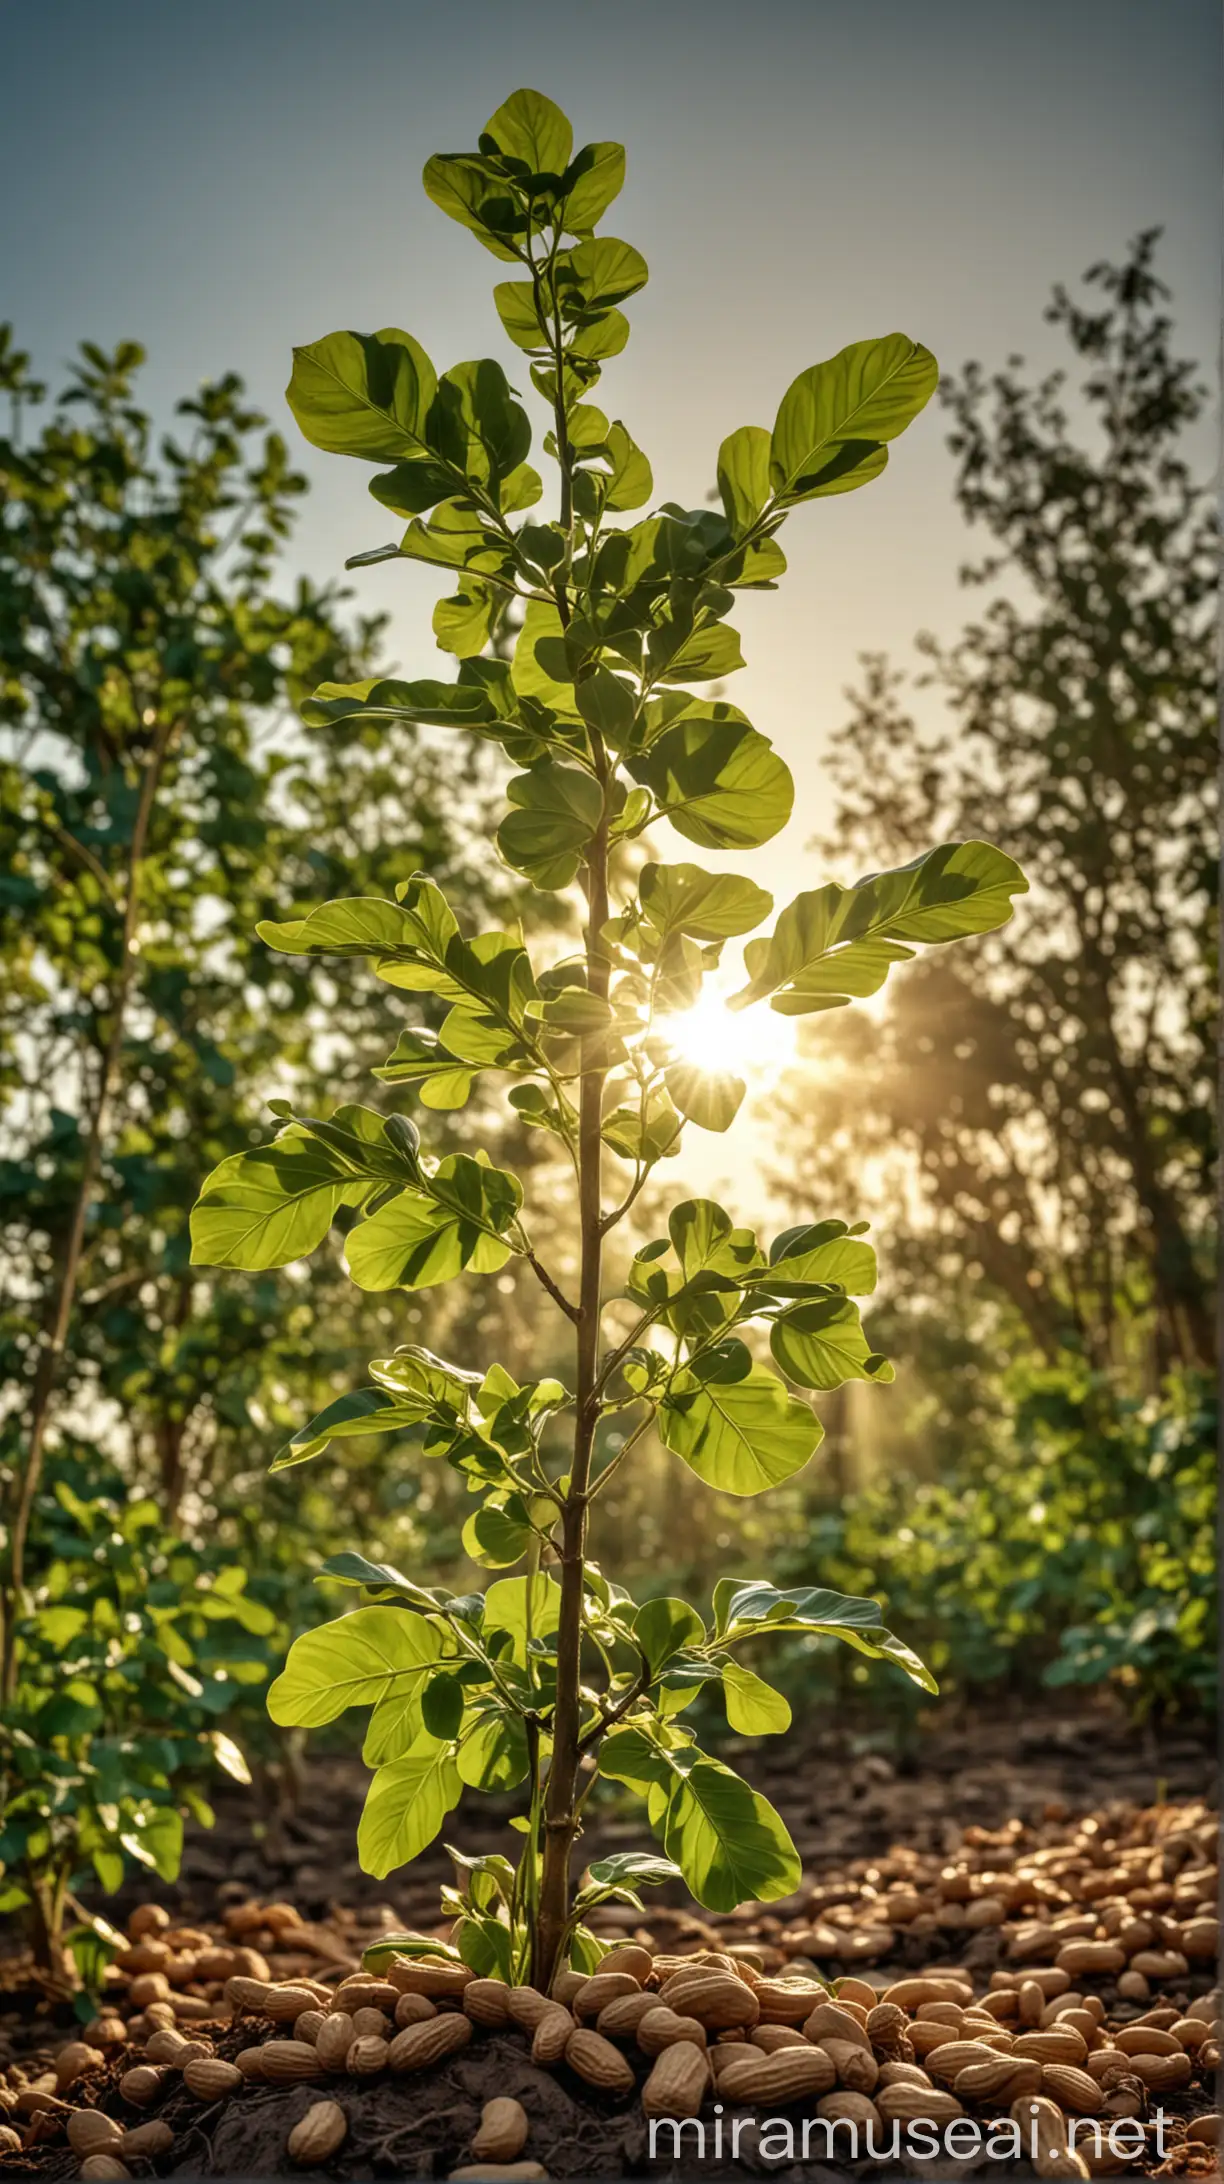 peanut plant, natural background, sun light effect, 4k, HDR, morning time weather